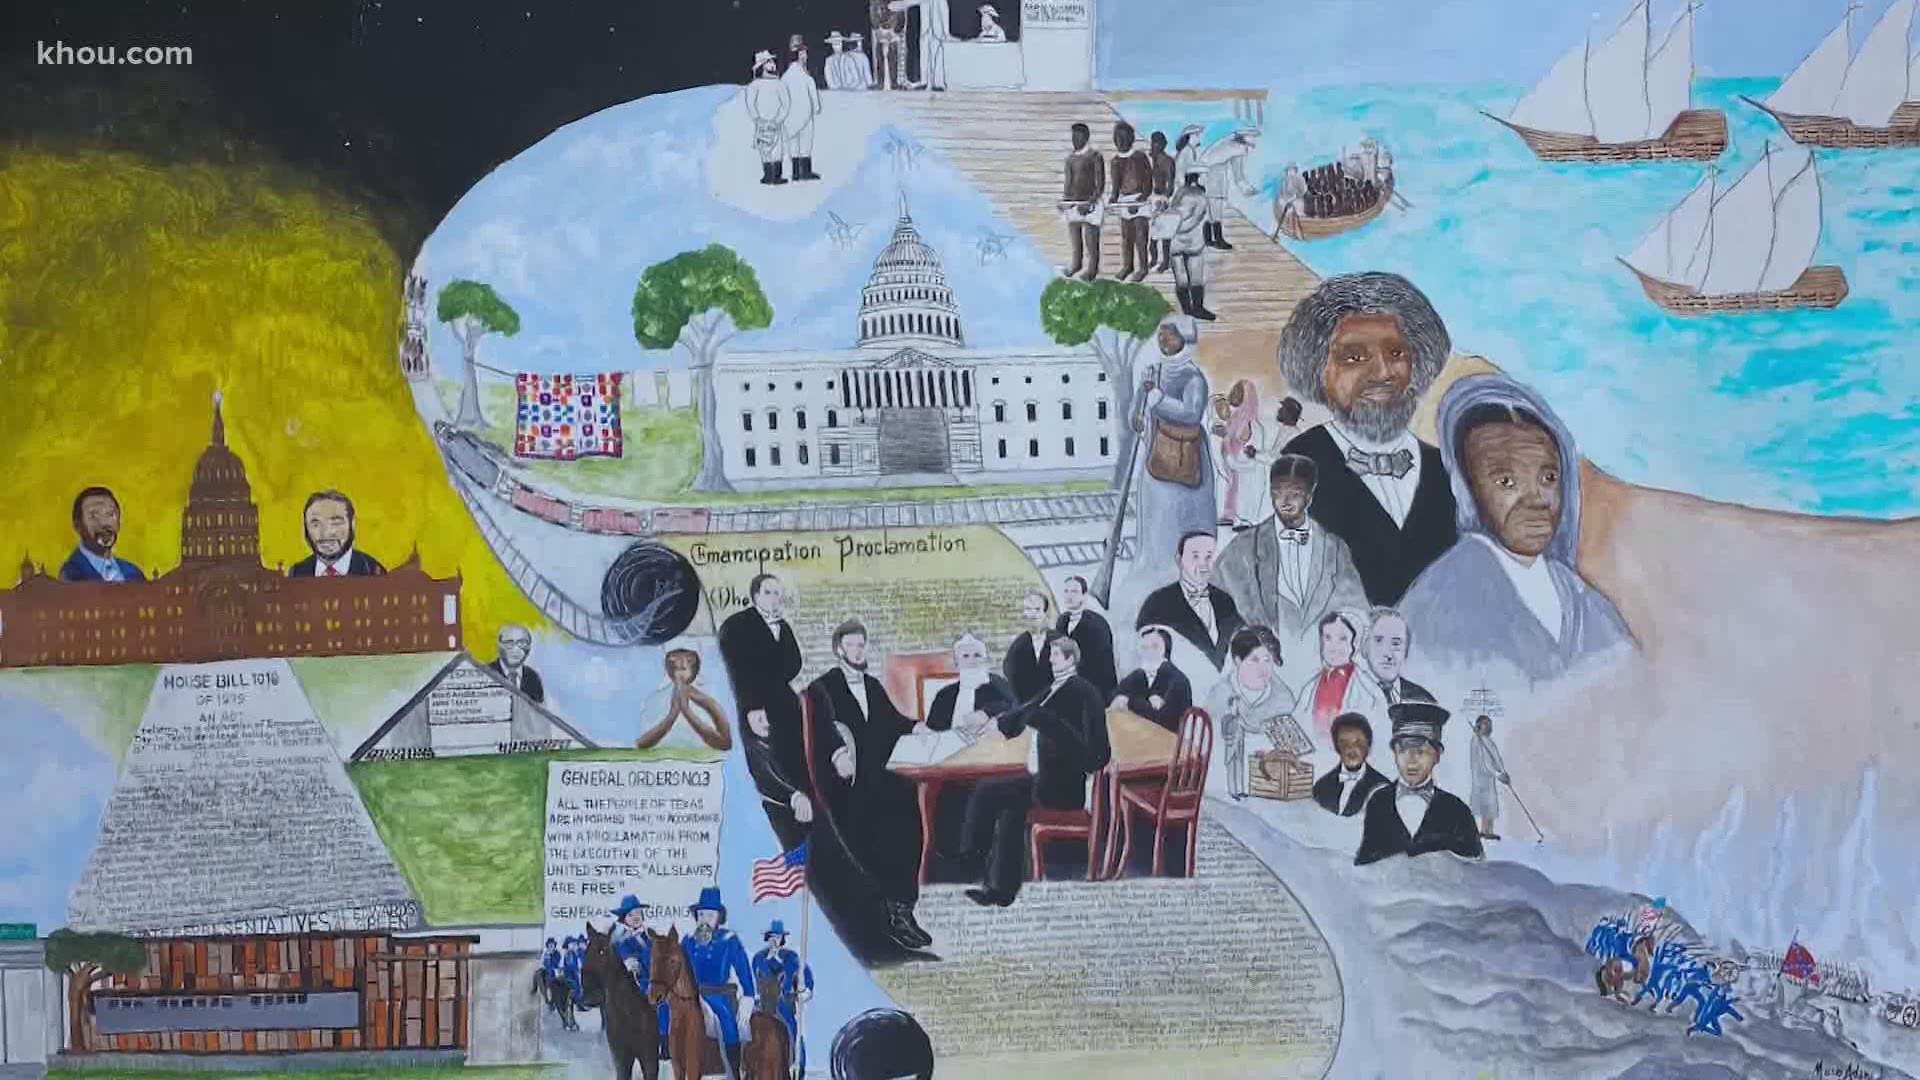 Moses Adams Jr. worked hard to create a 4-foot by 6-foot mural which celebrates the end of slavery in the United States of America.